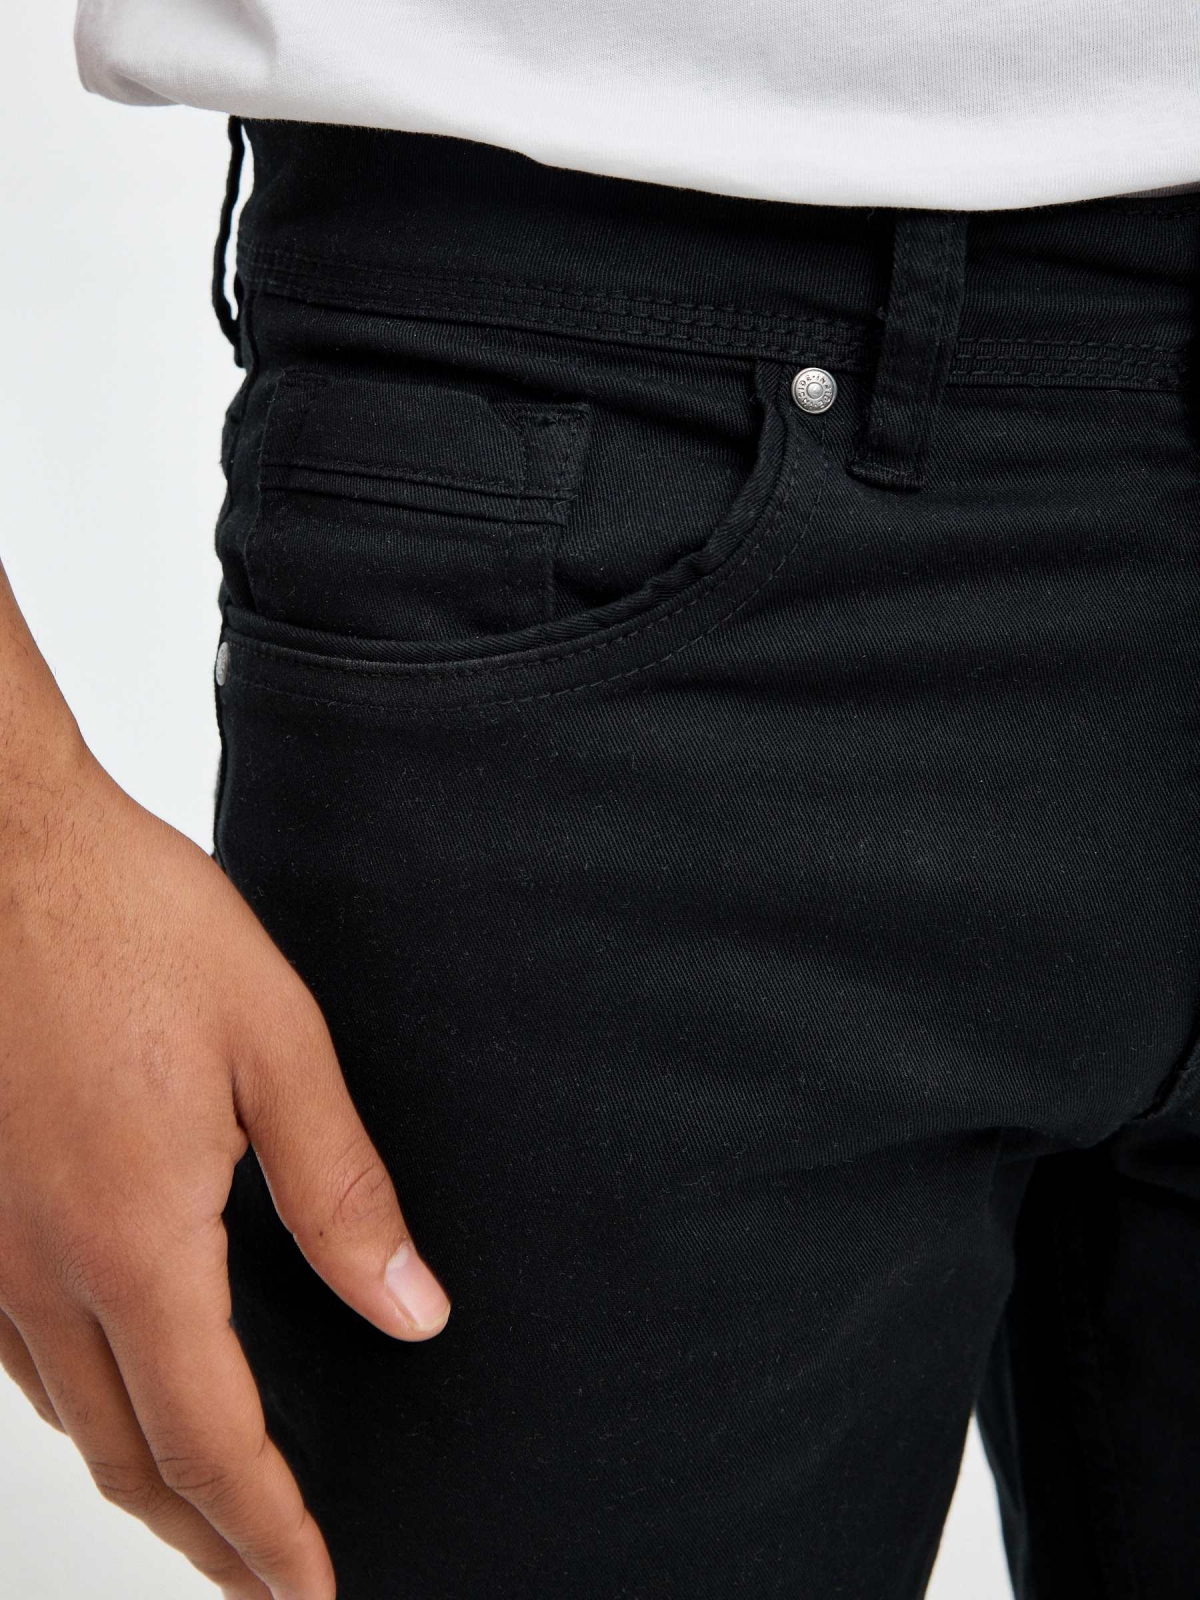 Bermuda short with five pockets black detail view